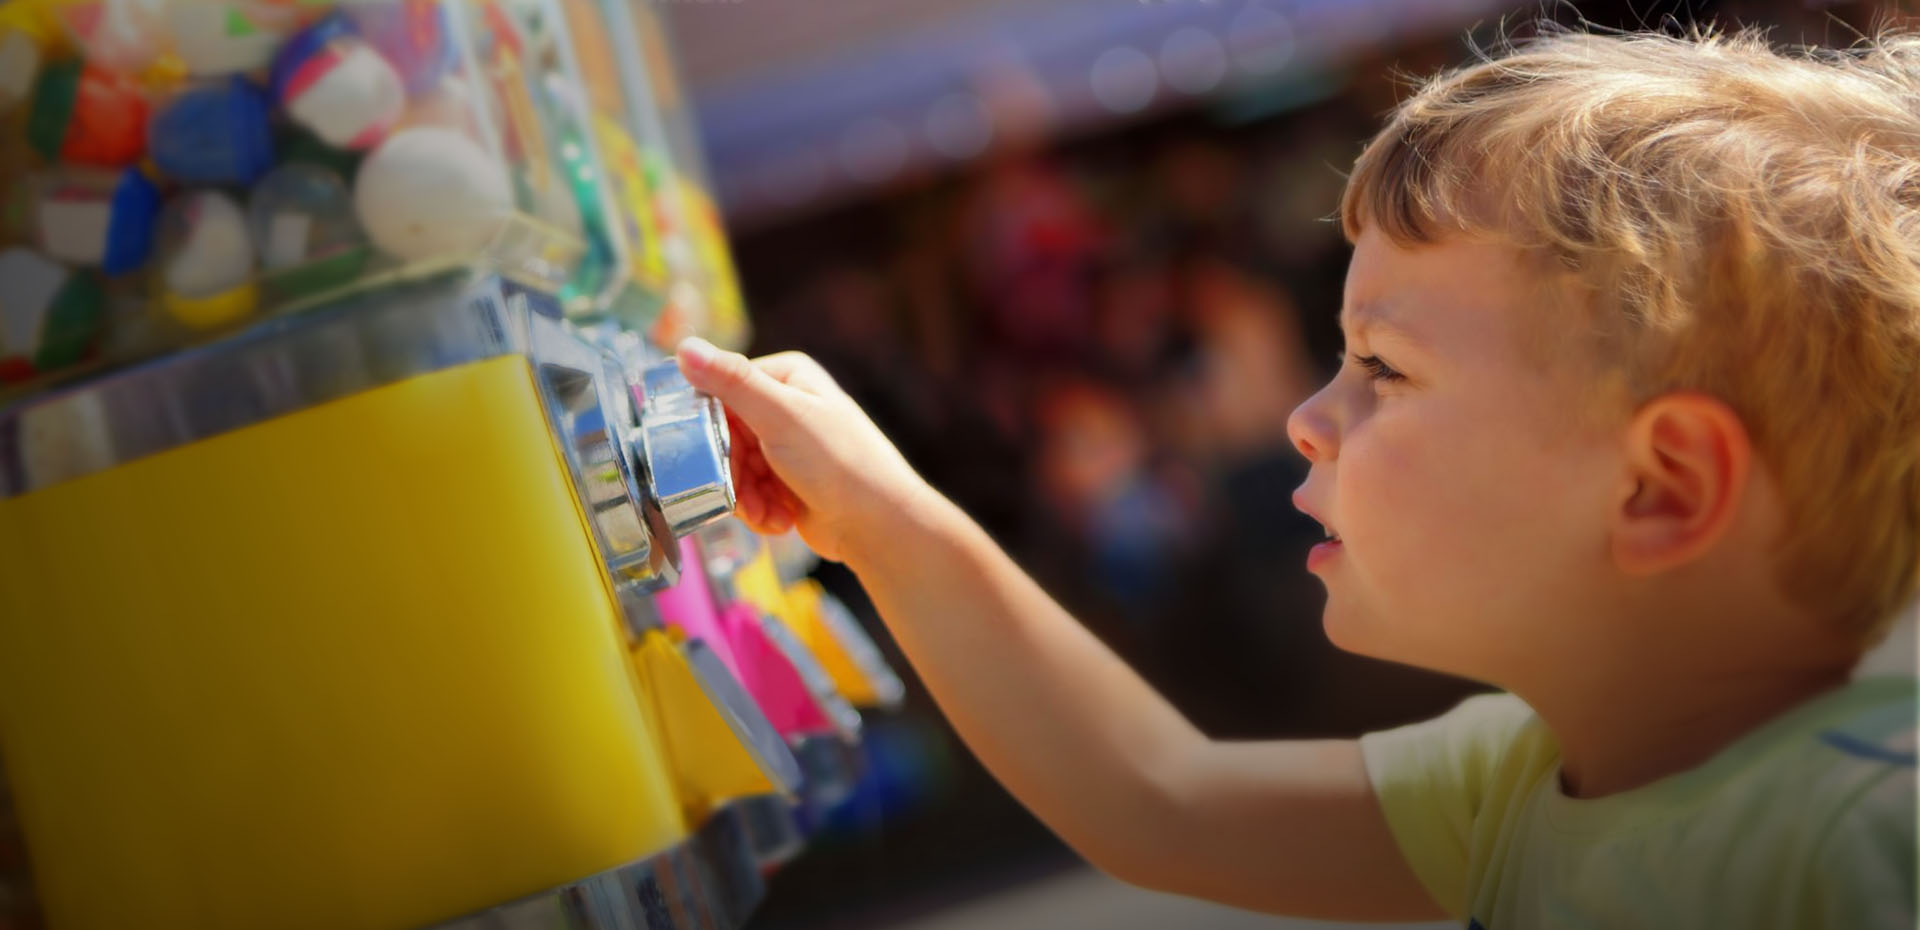 Installers Of Toys Vending Machines For Shopping Centres East Midlands